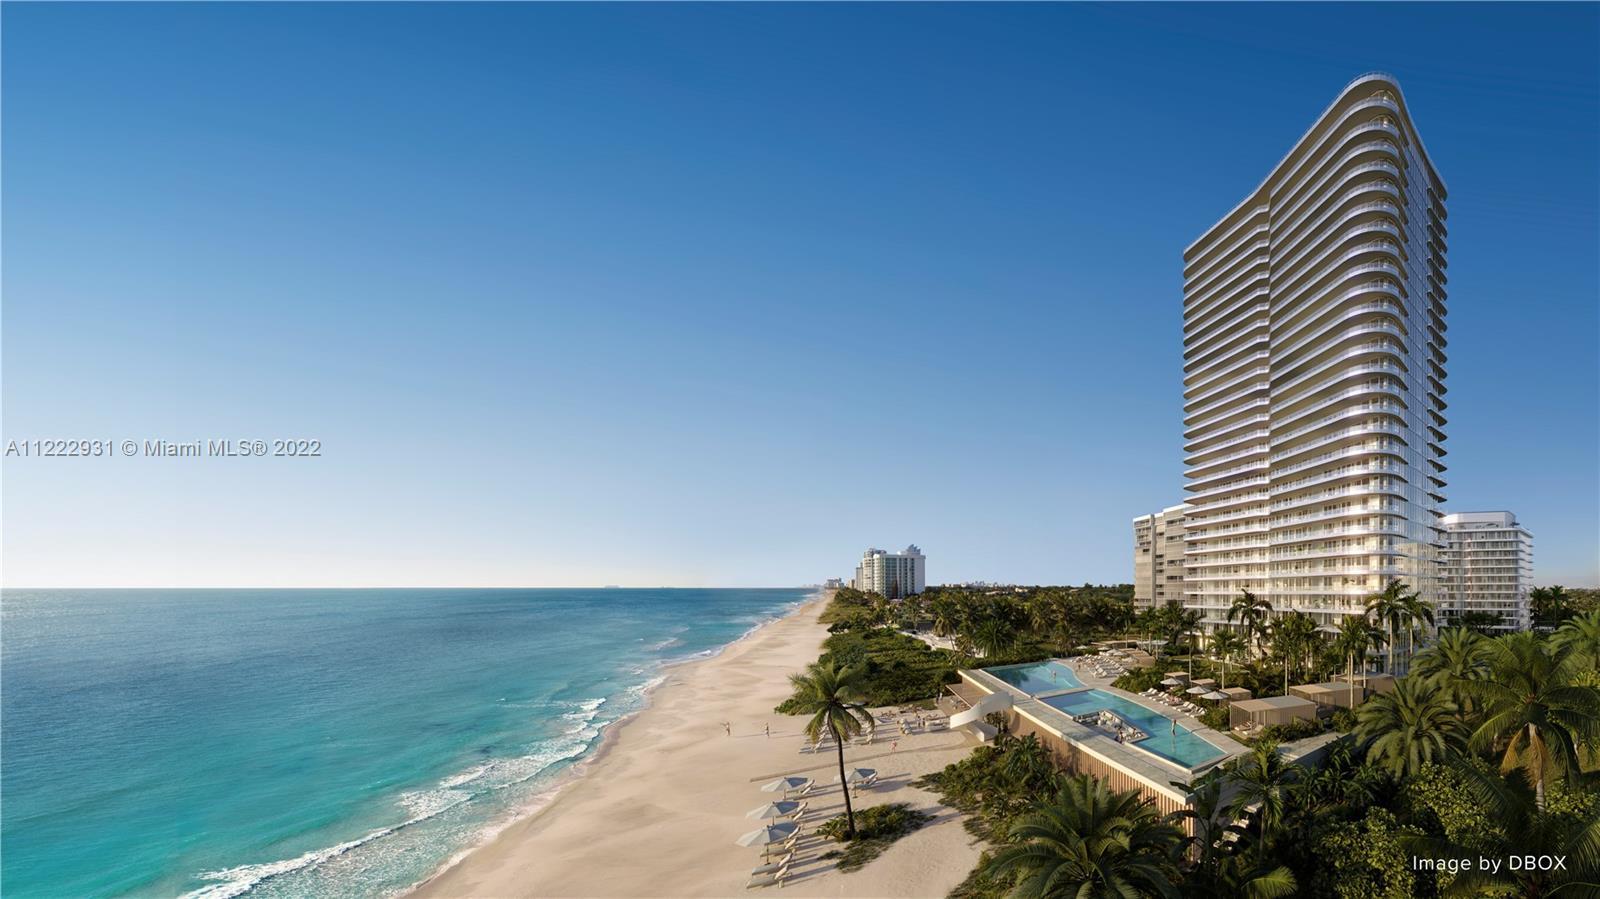 Welcome to the ultimate luxury "Beach House” lifestyle at The Ritz-Carlton Residences Pompano Beach!